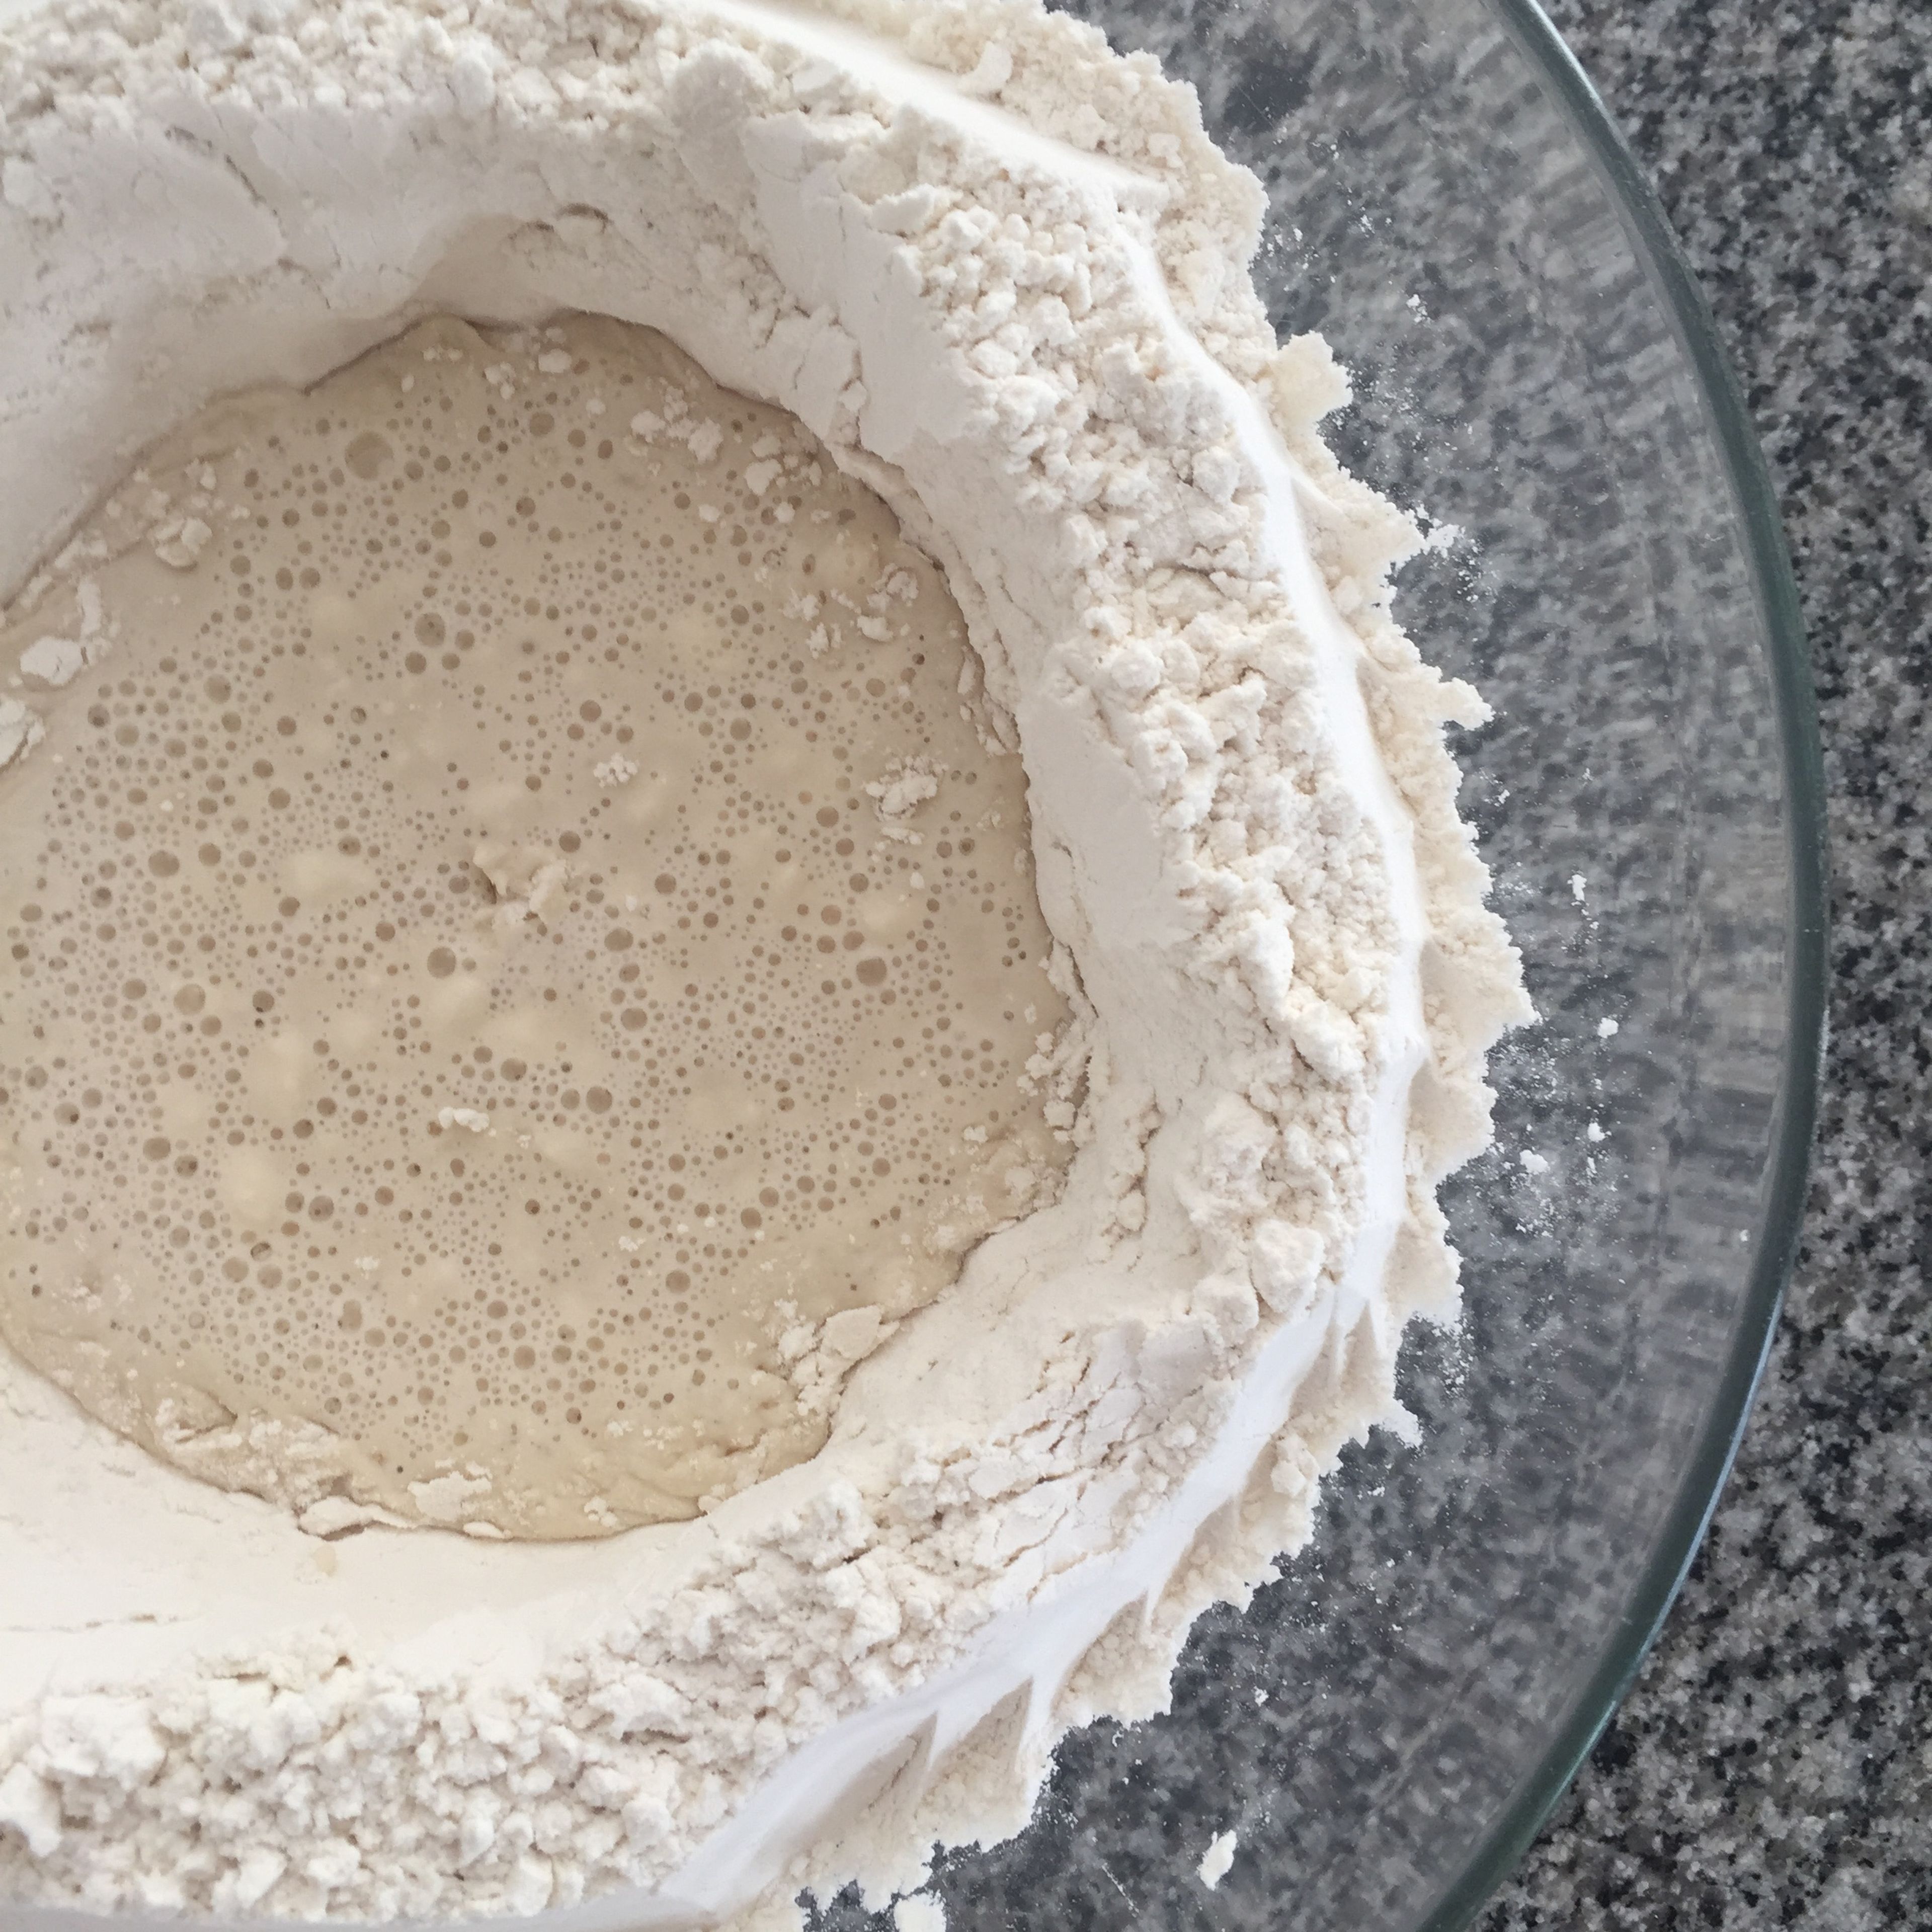 pour yeast mixture into the well, and stir with a little flour (this will feed the yeast). Set to bloom in a warm place for 15-20 minutes.